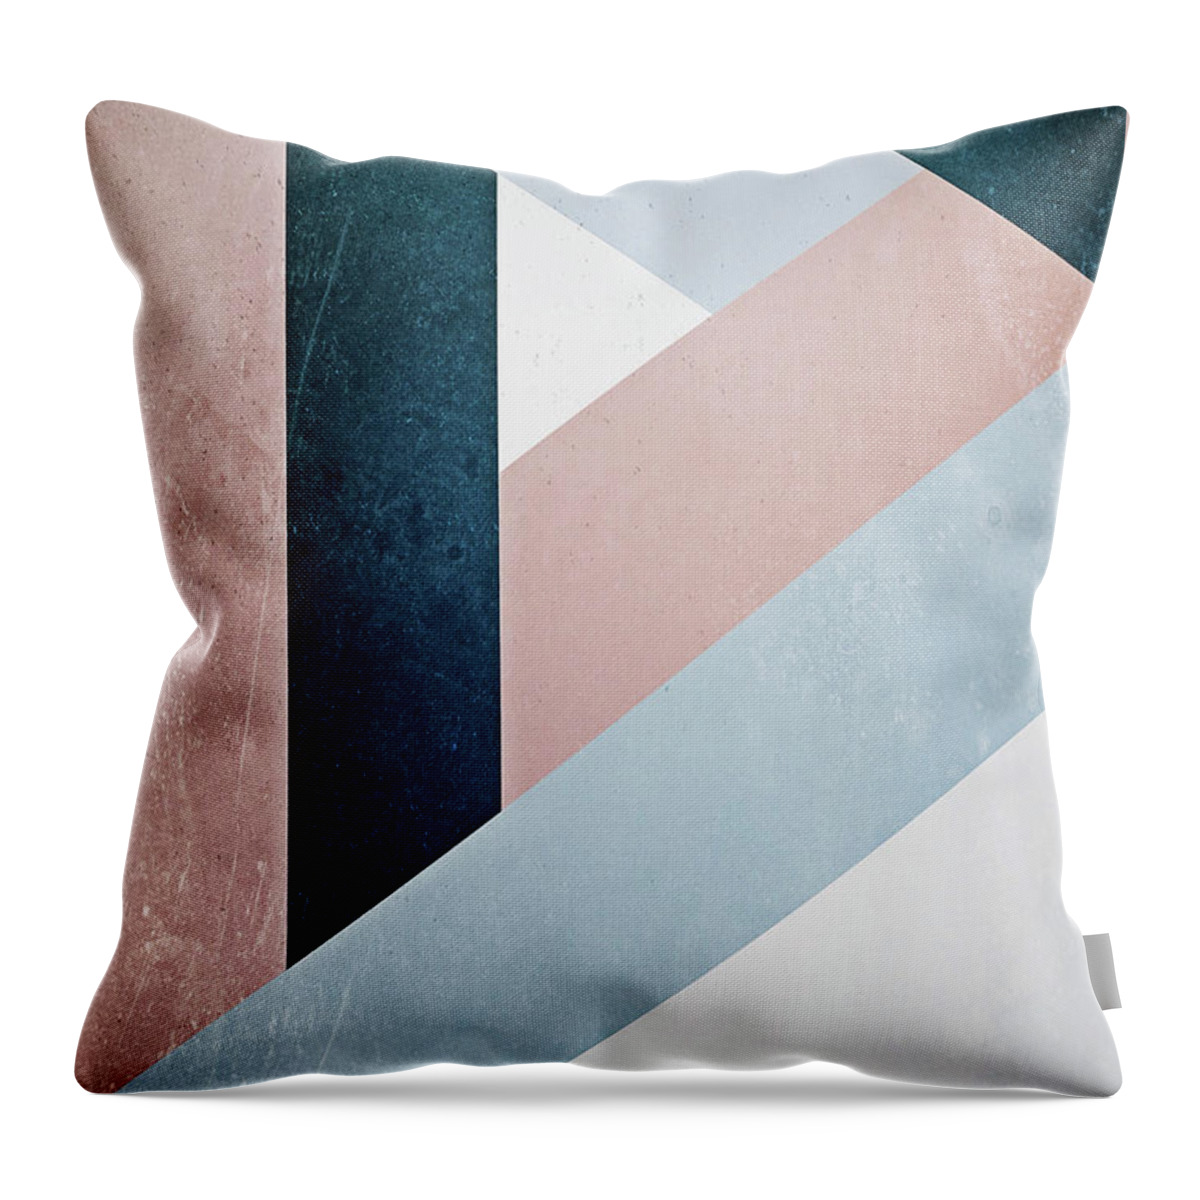 Complex Throw Pillow featuring the mixed media Complex Triangle by Emanuela Carratoni